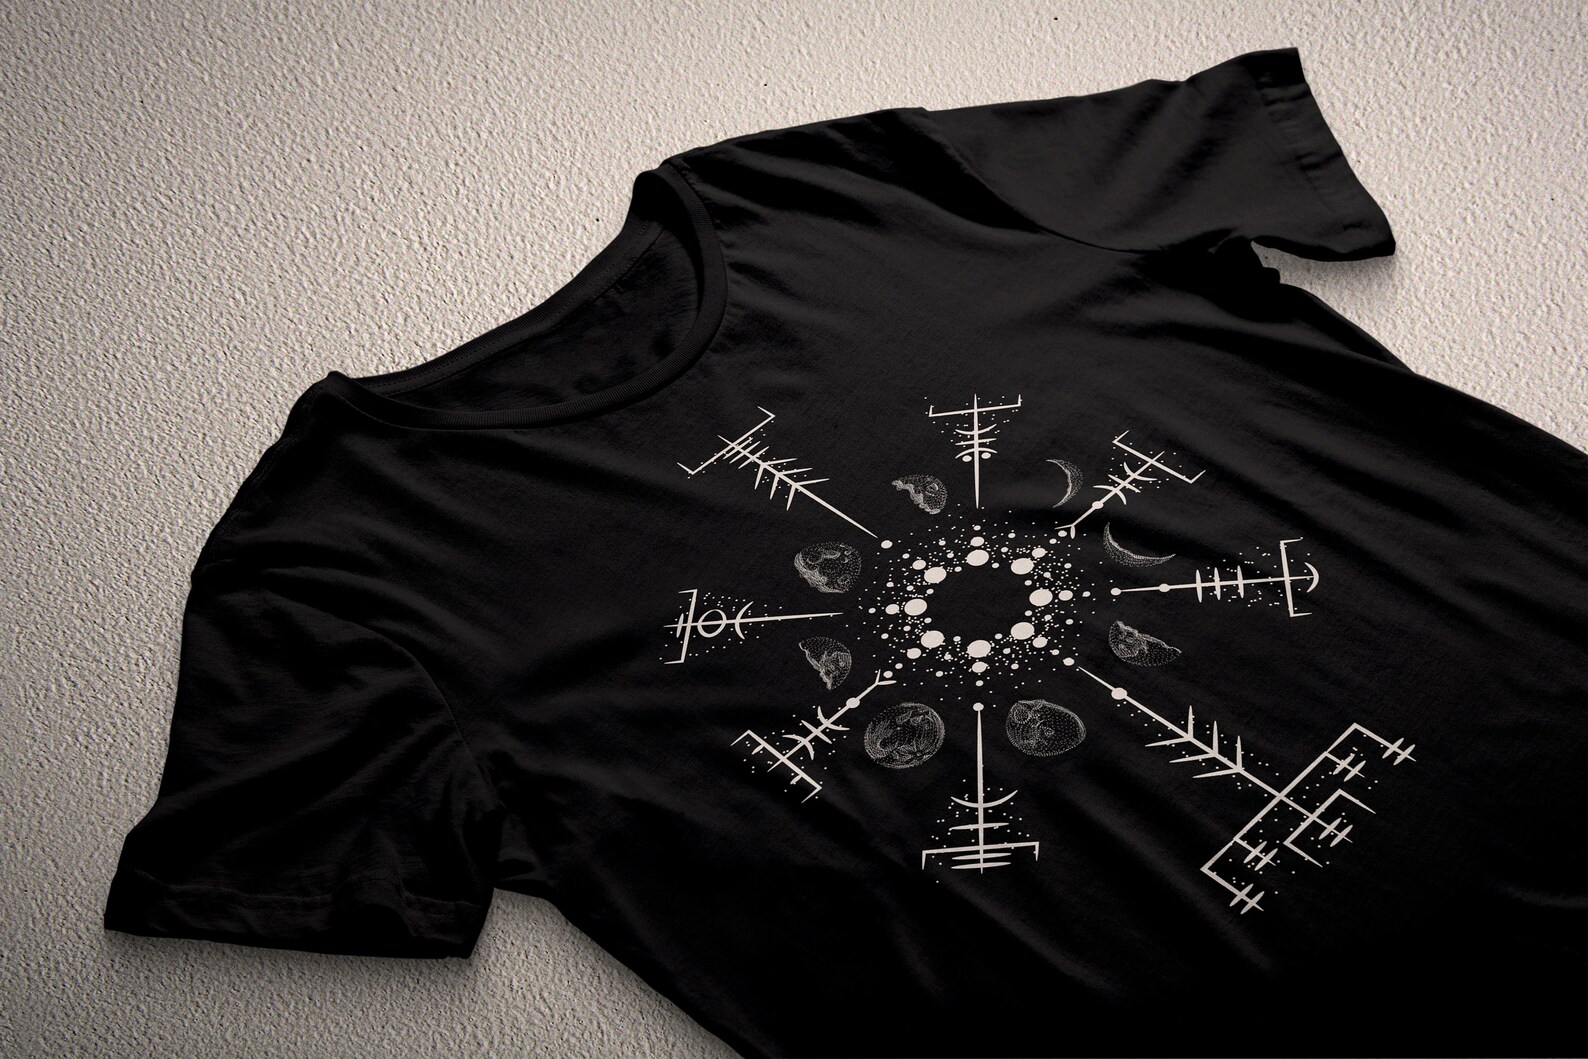 Vegvisir Viking Runes Sign Shirt Wiccan Wicca T-shirt Occult | Etsy